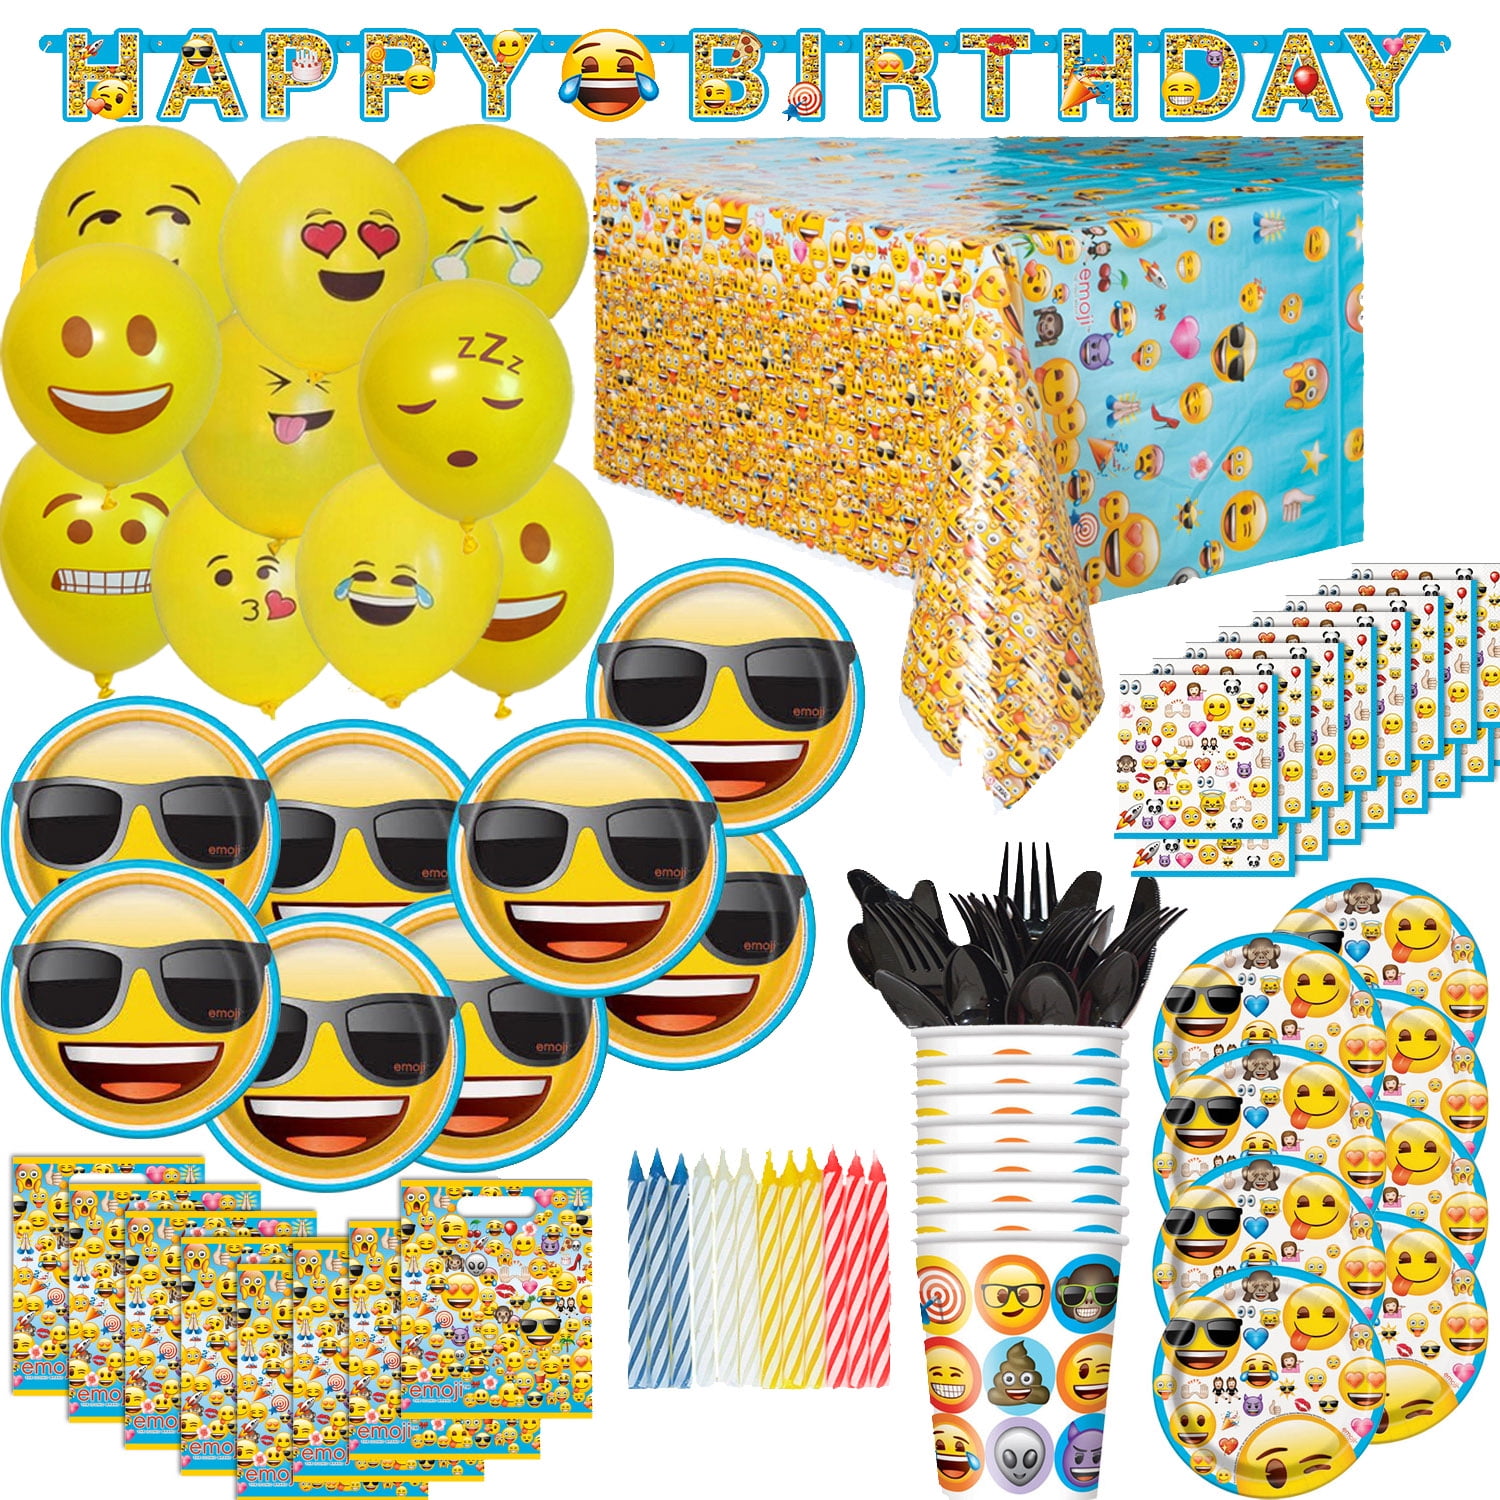 EMOJI SMILEY FACE PARTY SUPPLIES PLATES CUPS NAPKINS TABLECLOTH BAGS MORE! 